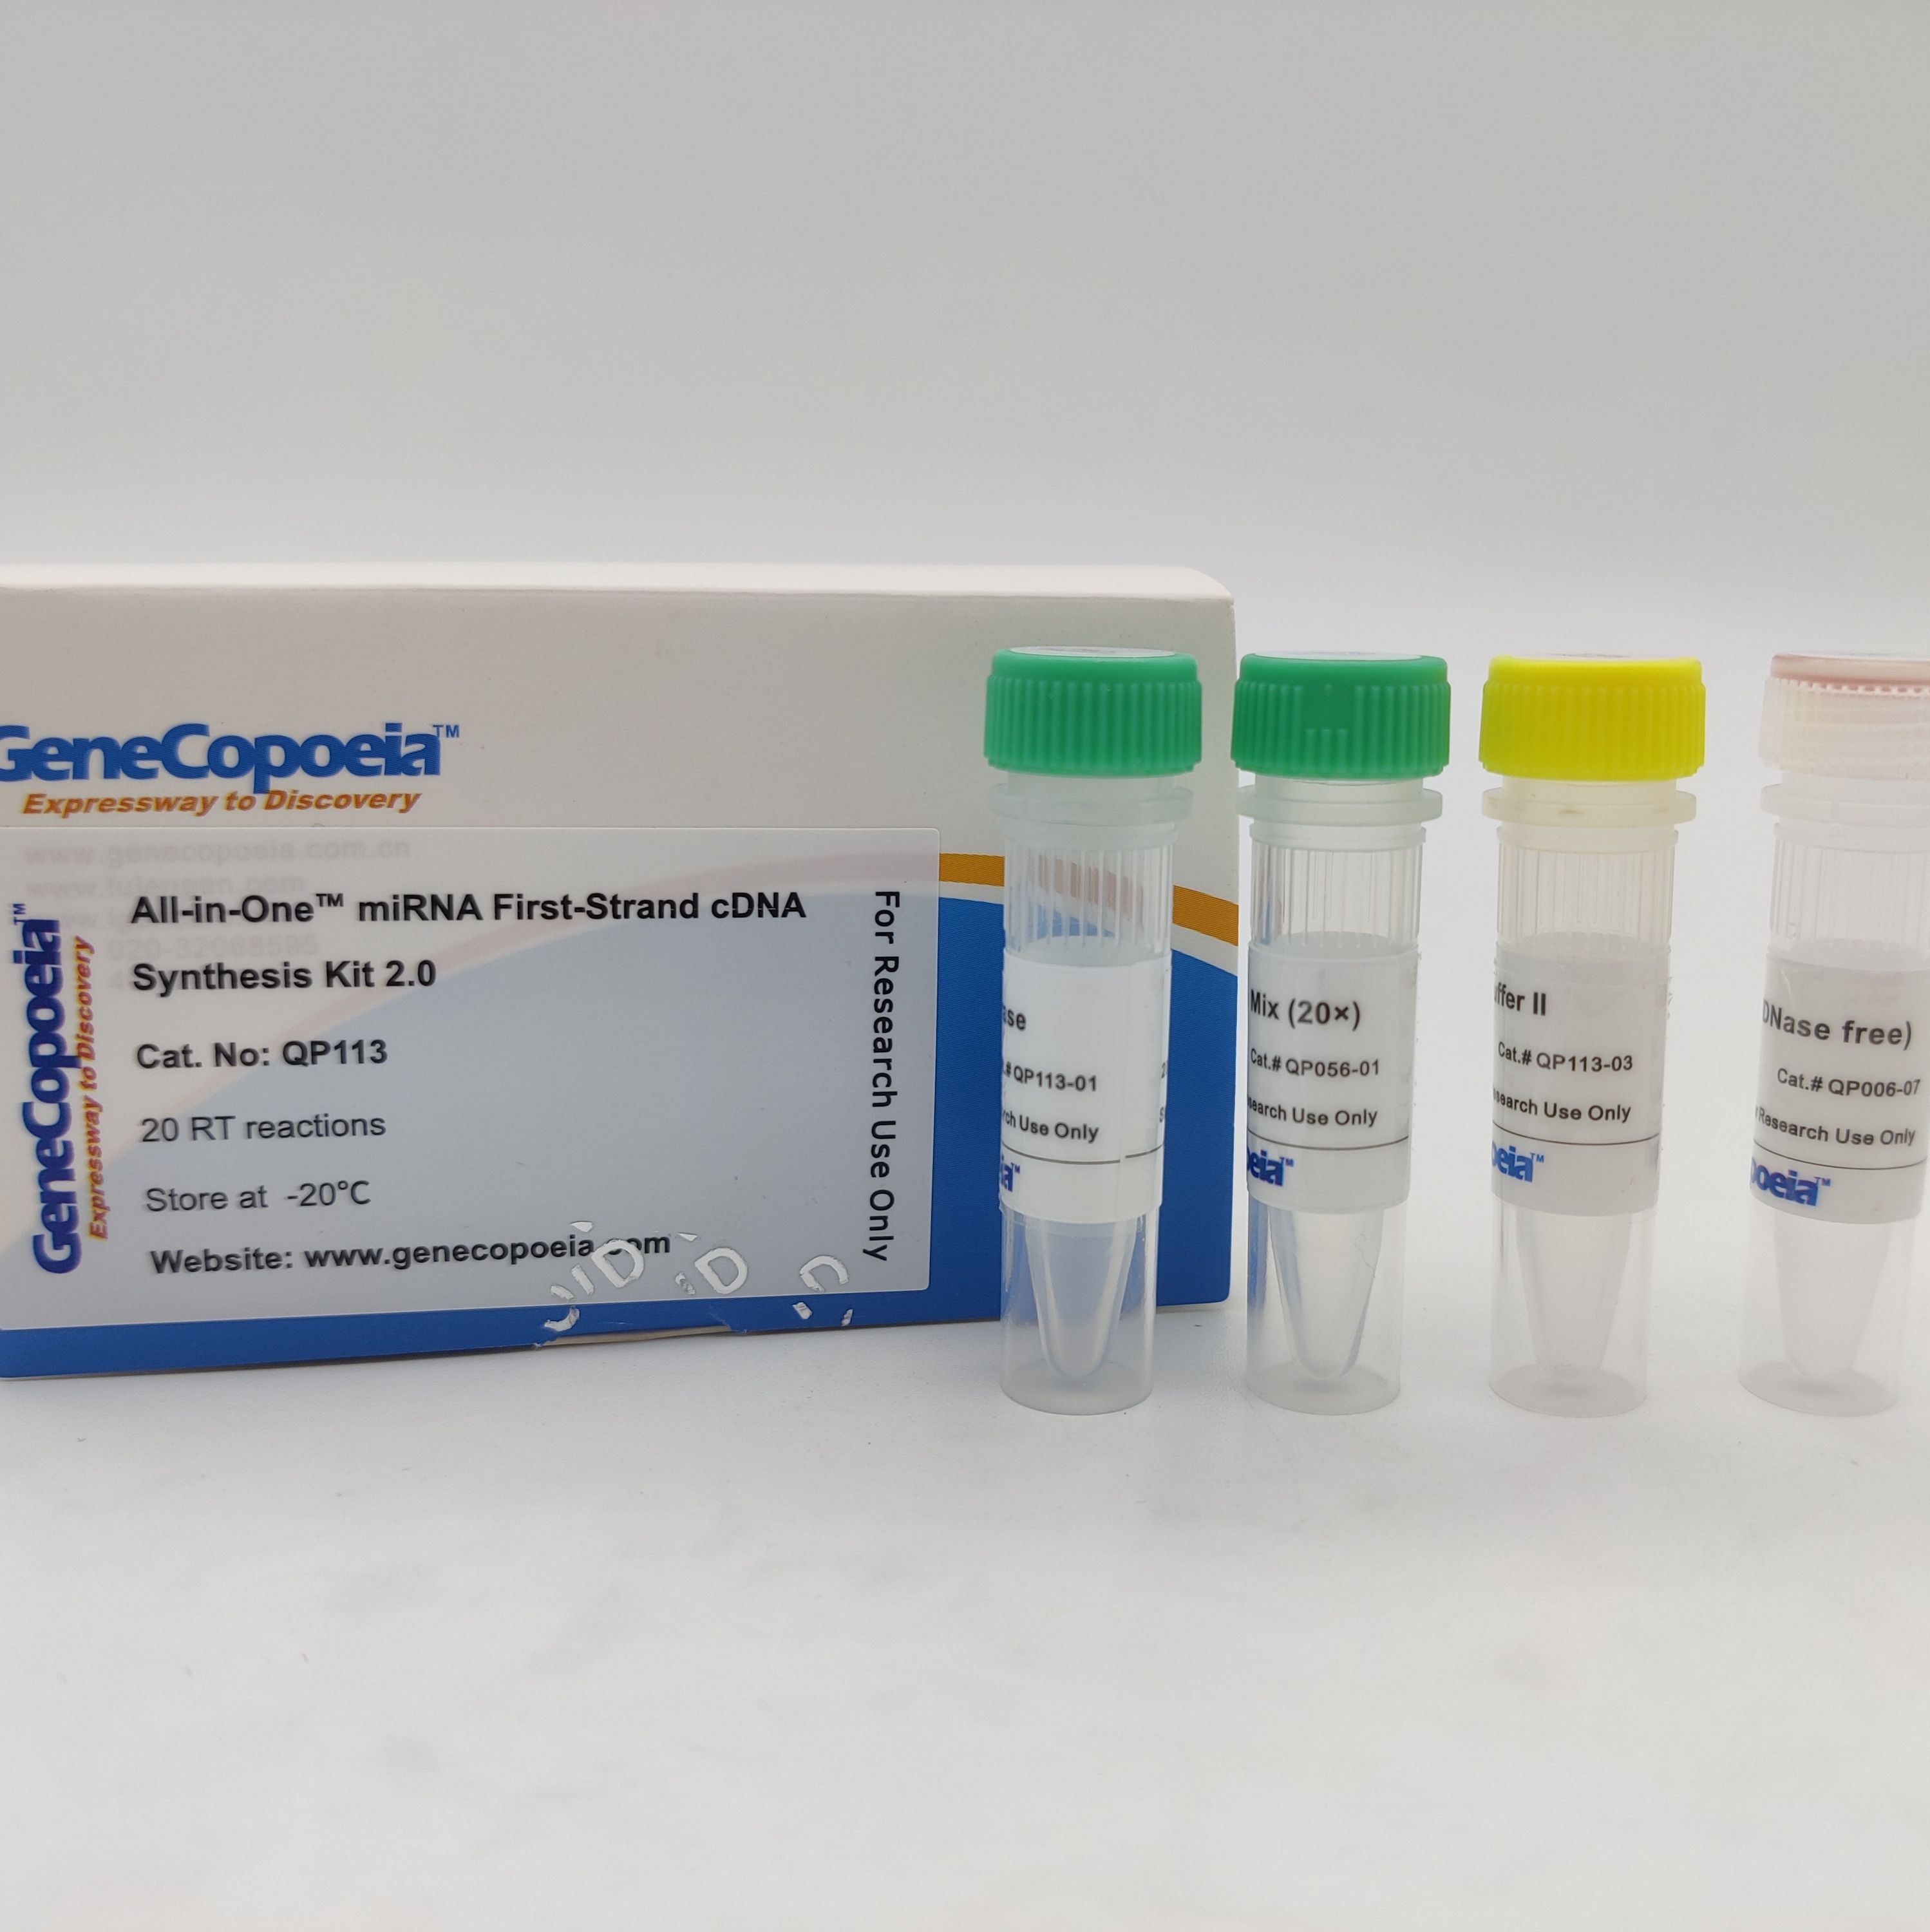 All-in-One™ miRNA First-Strand cDNA Synthesis Kit